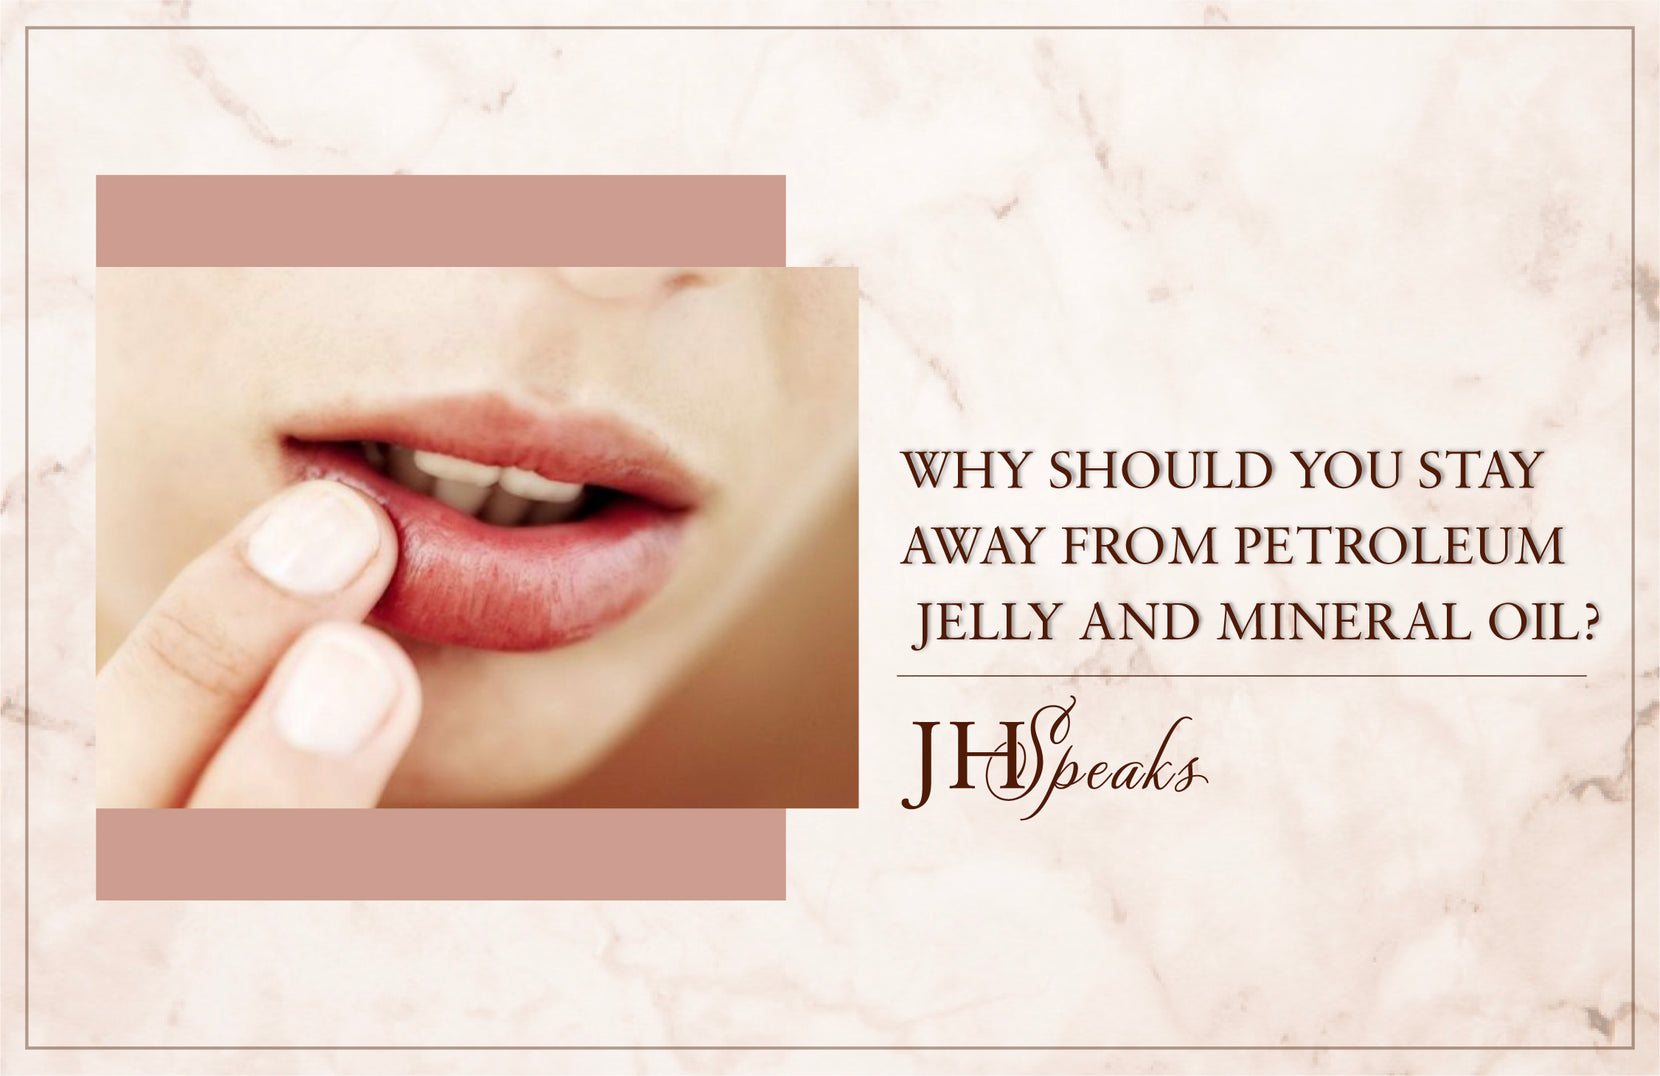 Why Should You Stay Away From Petroleum Jelly And Mineral Oil